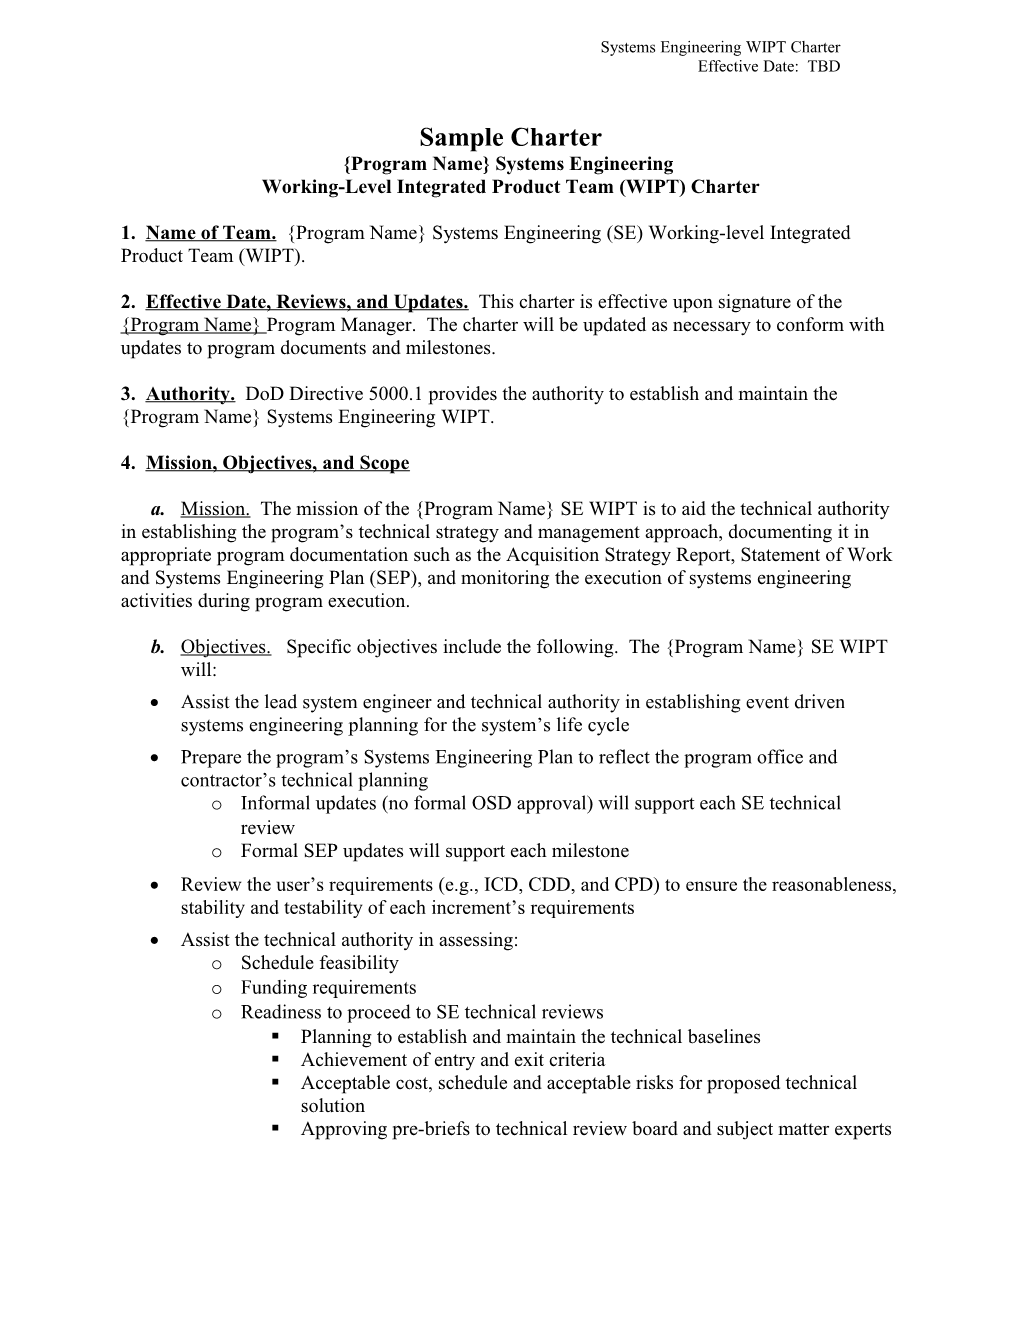 Systems Engineering Working-Level Integrated Product Team Sample Charter